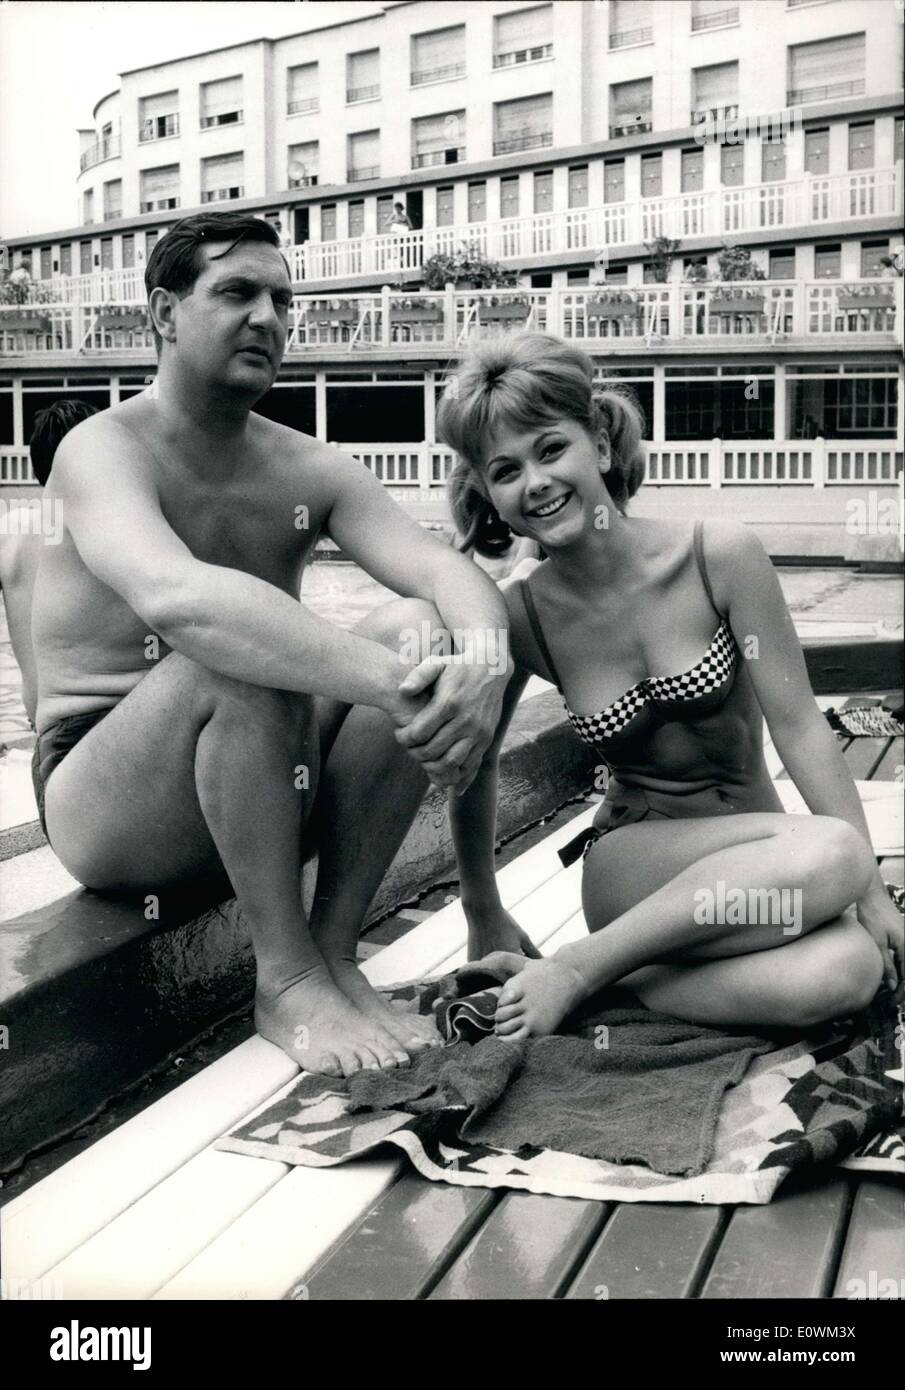 Jul. 16, 1963 - Jacques Charon and France Anglade at the Pool Stock Photo